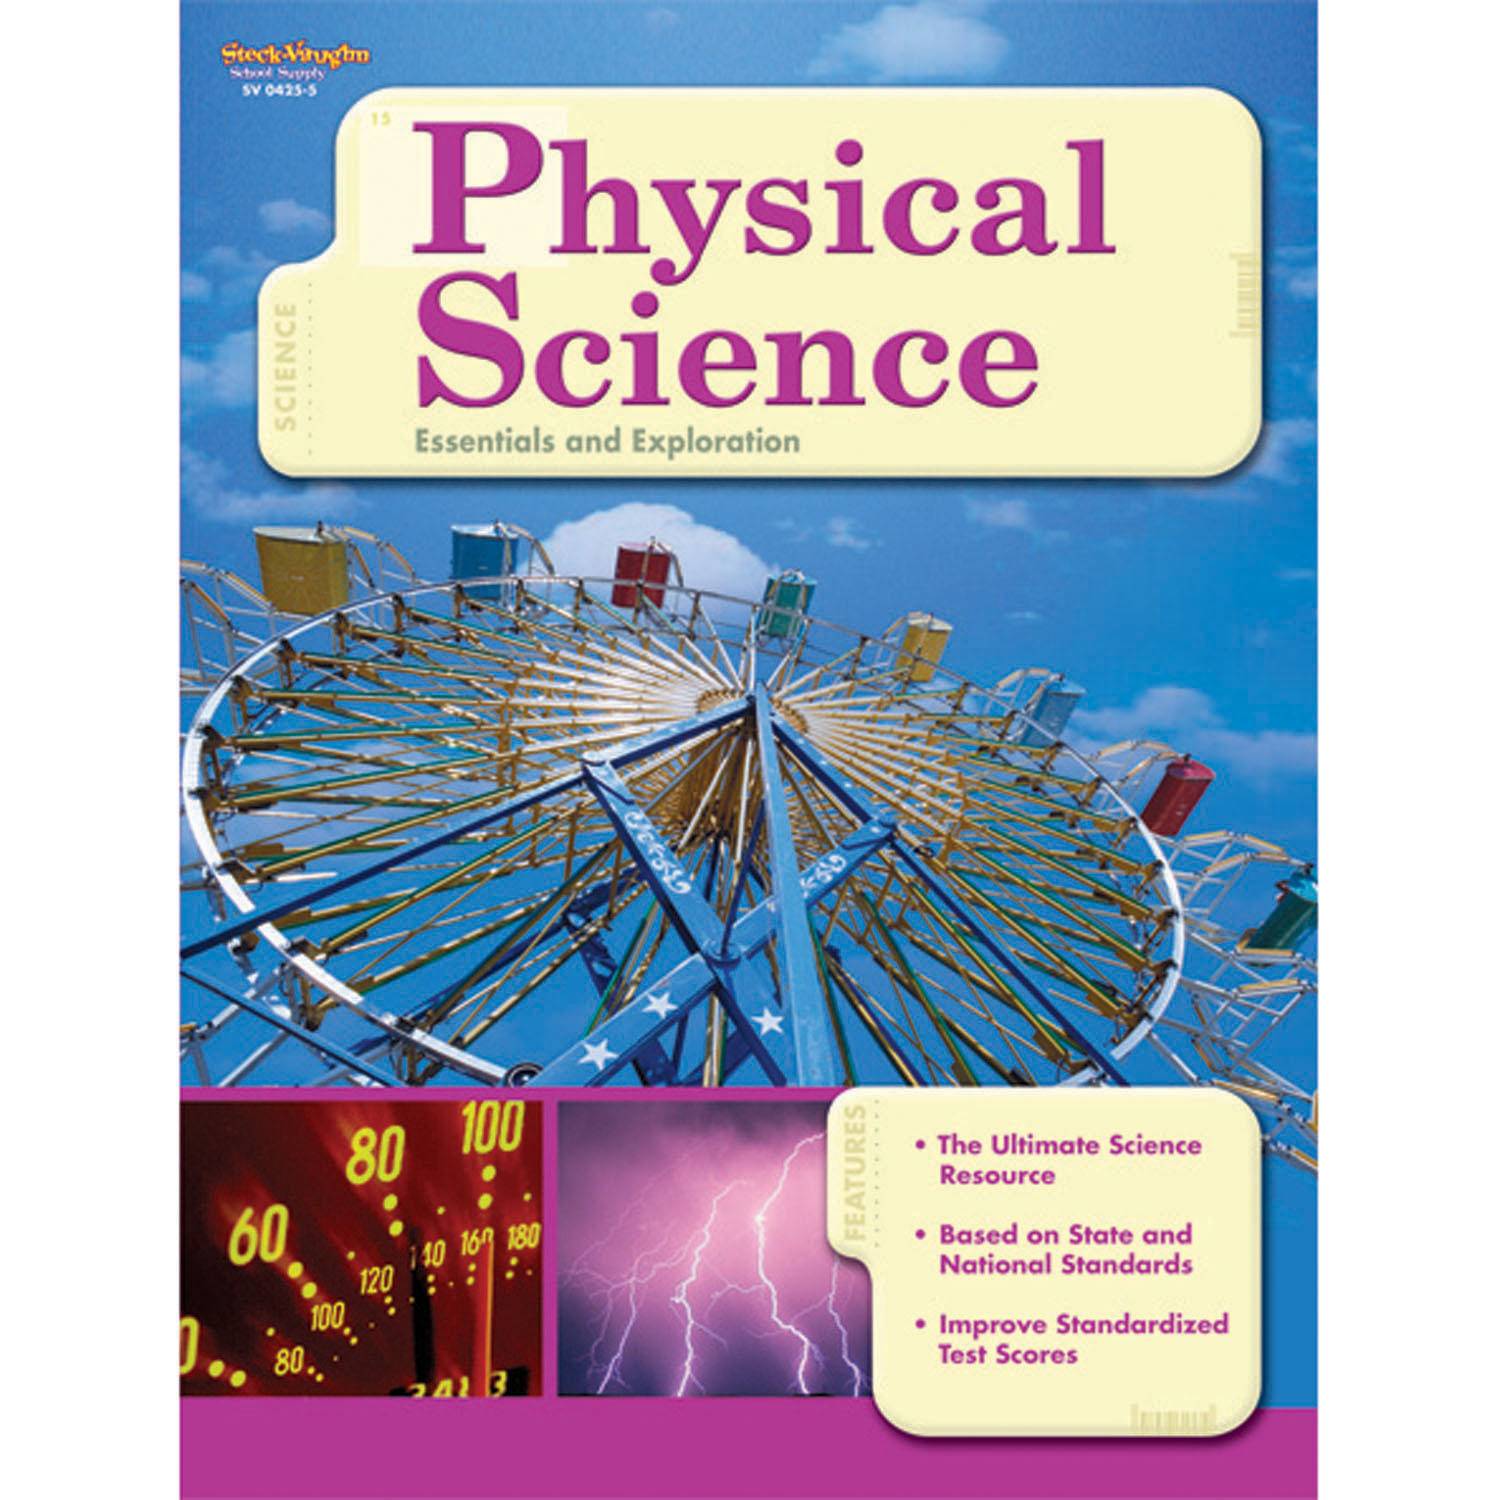 Physical science. Книга physical Science. The Science book. Physical Science exploring Space and time book. The physics book.